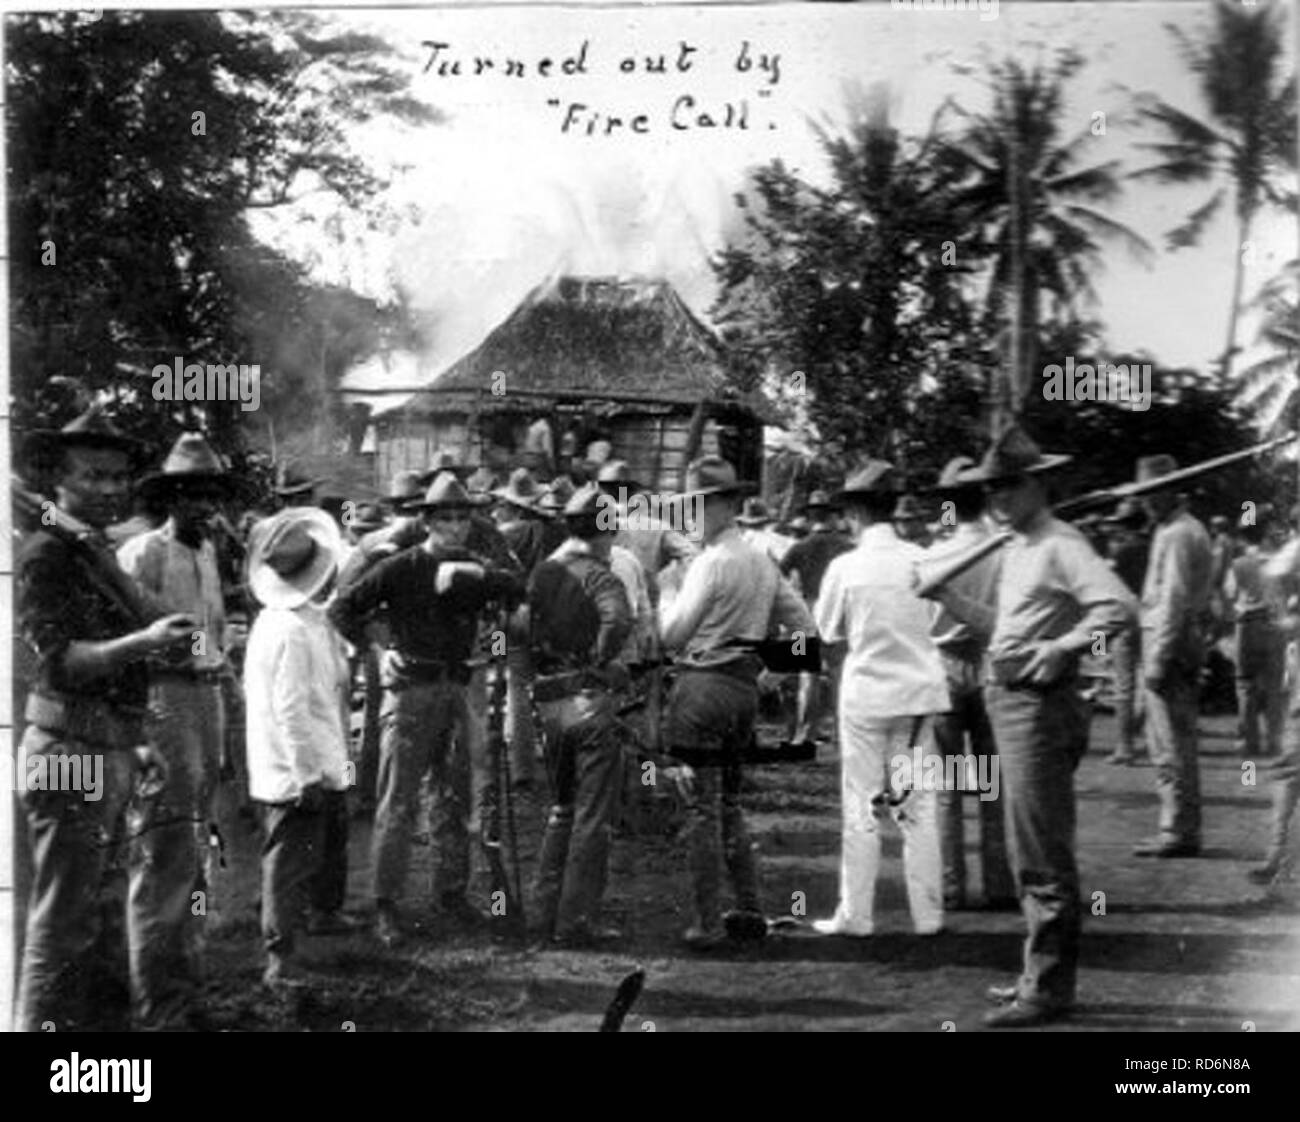 American soldiers in Cagayan de Misamis turned out by firecall circa 1900. Stock Photo